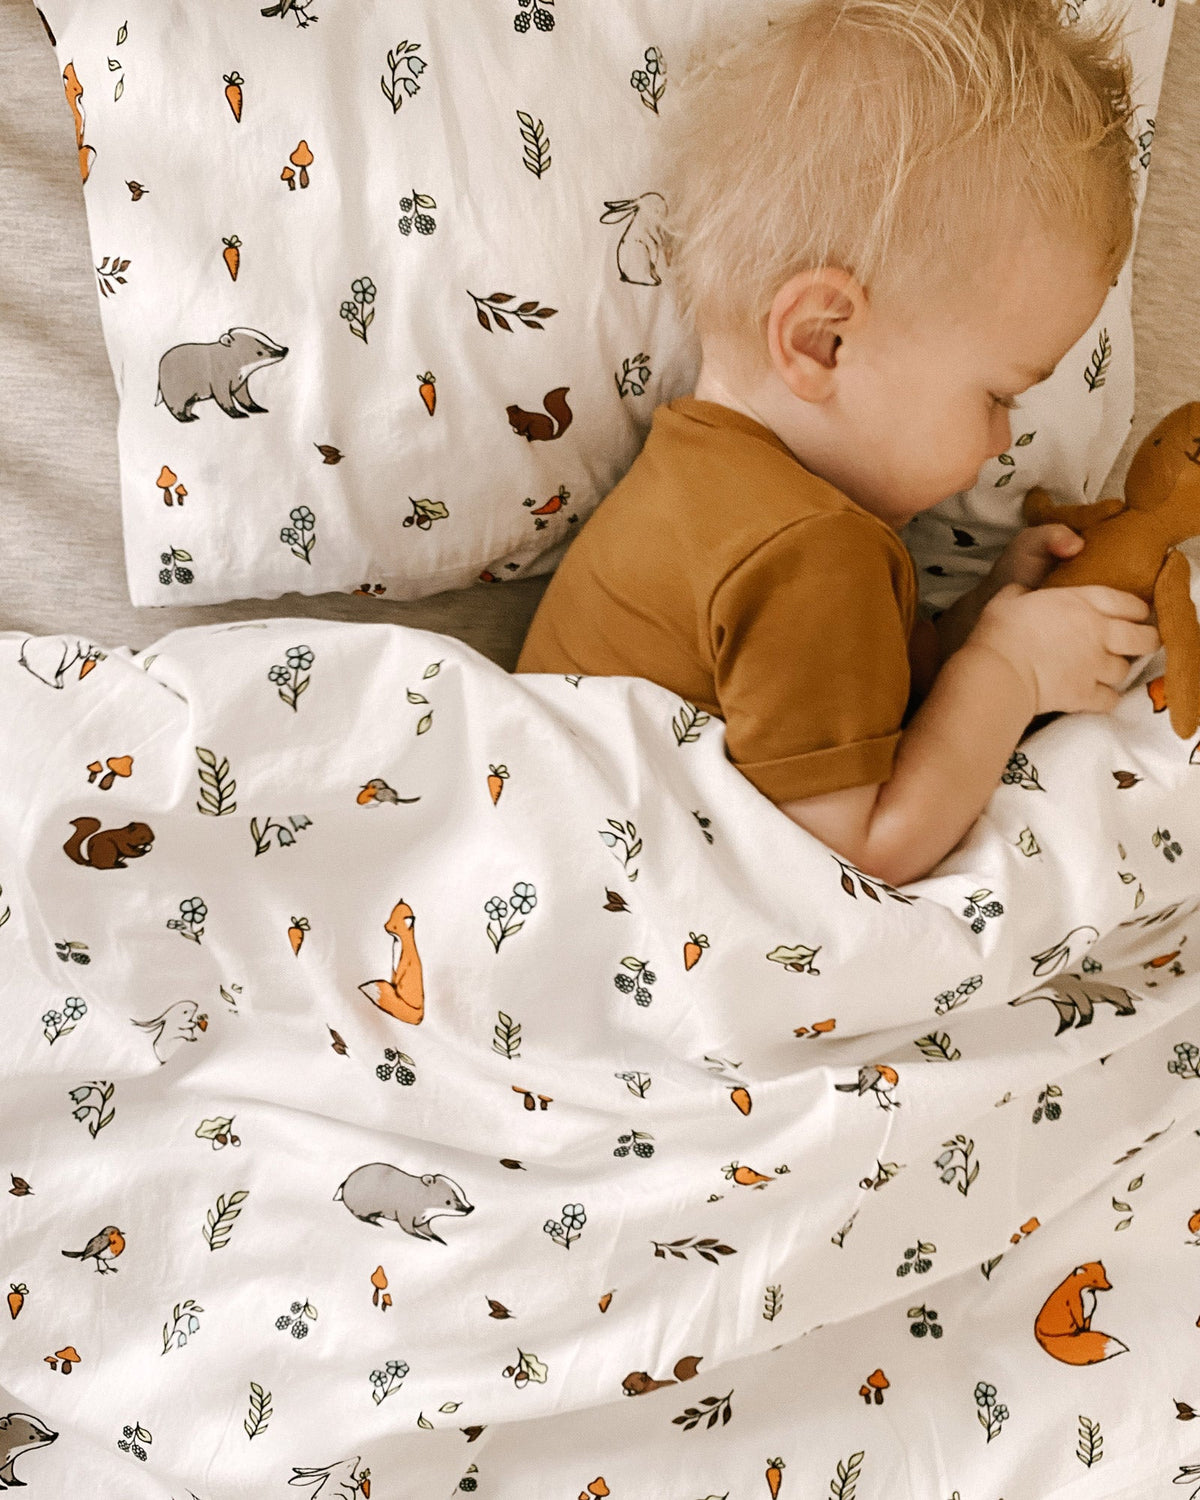 Organic cotton duvet cover pillowcase set with baby resting with teddy